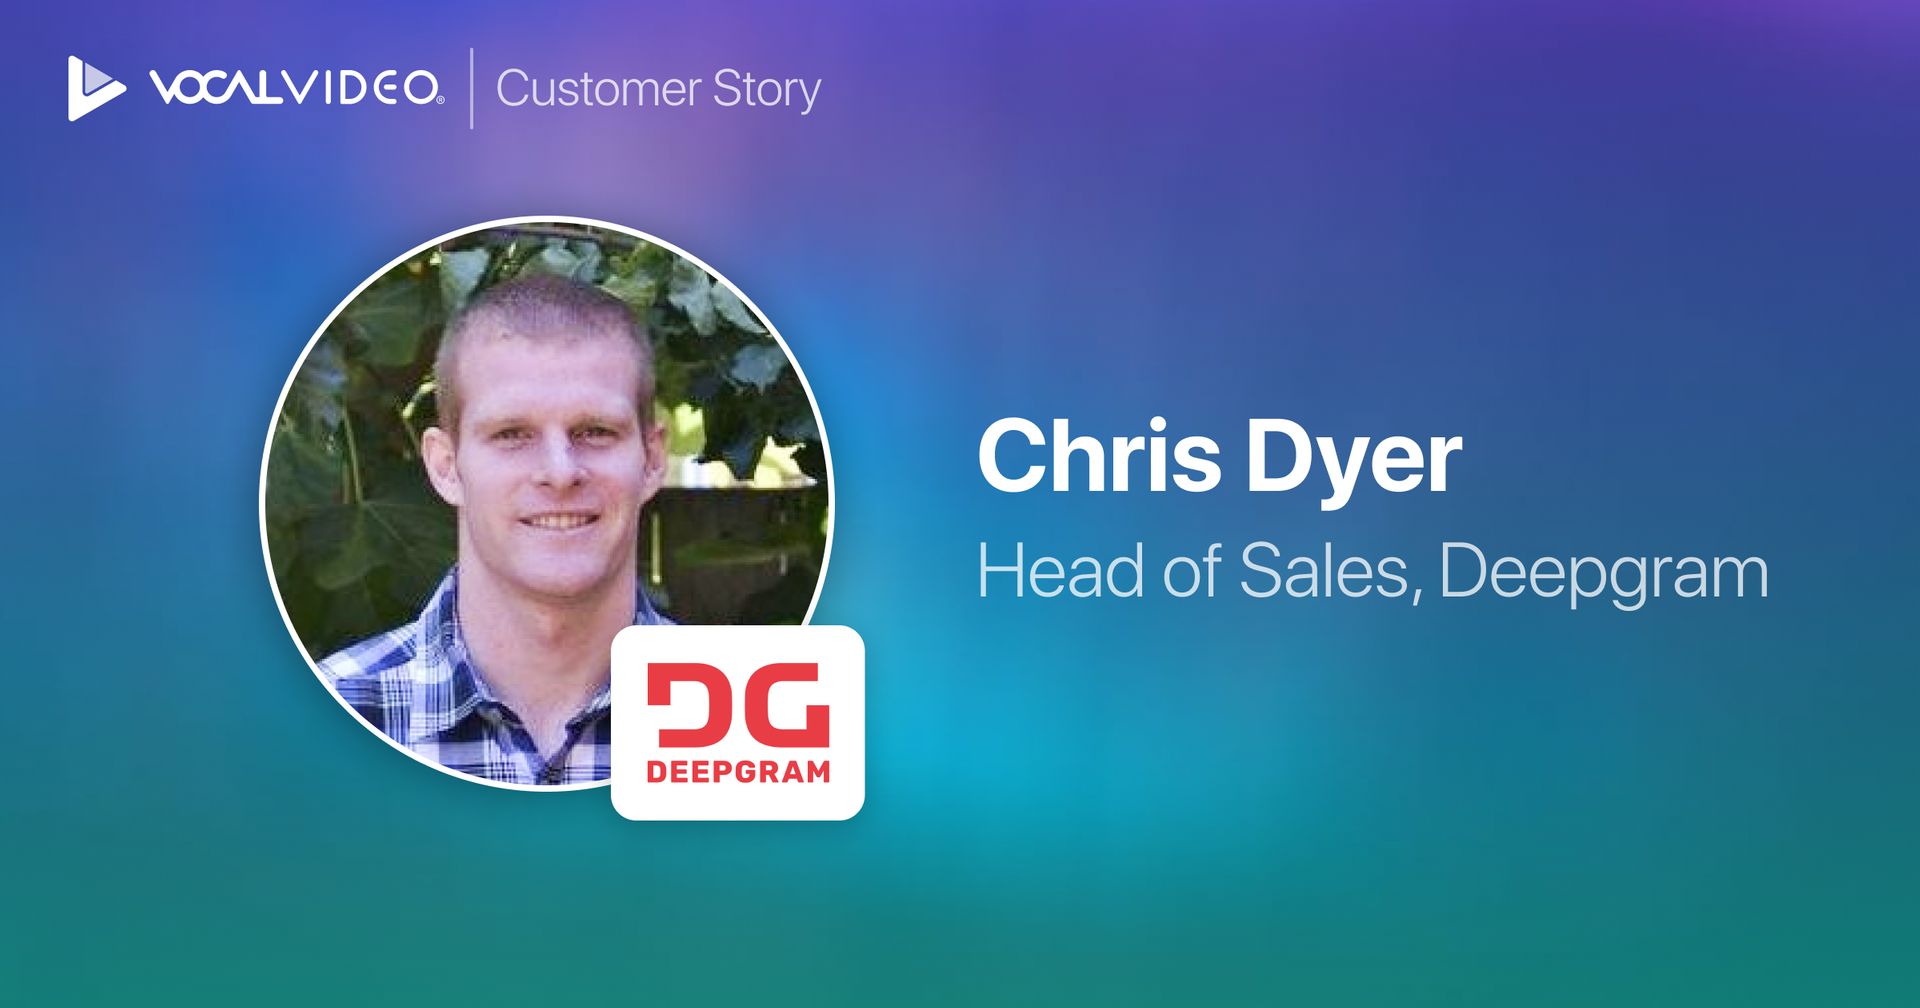 Deepgram: Mid-Funnel Video Testimonials Accelerate Sales and Close More Deals